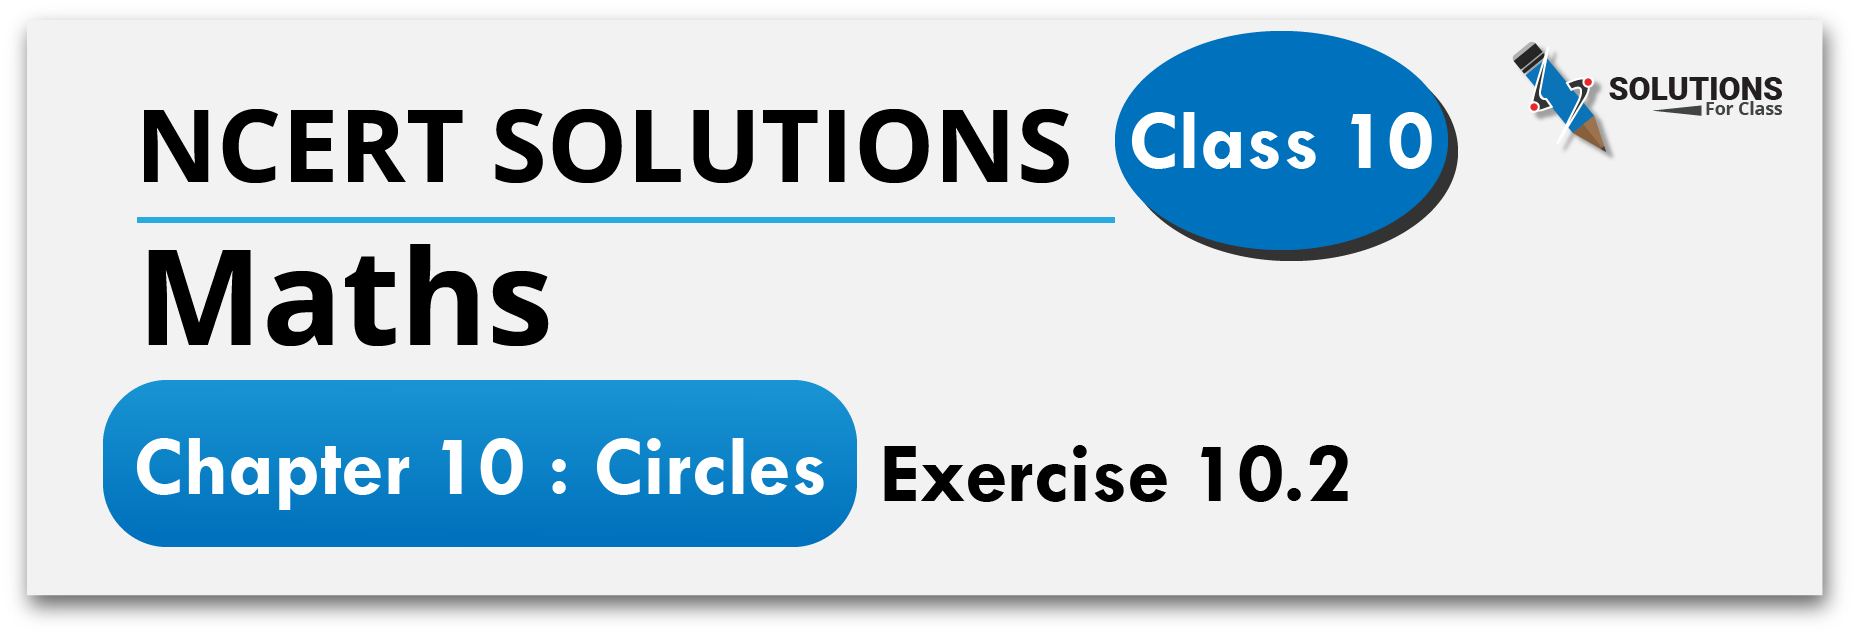 NCERT Solutions For Class 10, Maths, Chapter 10, Circles, Exercise 10.2